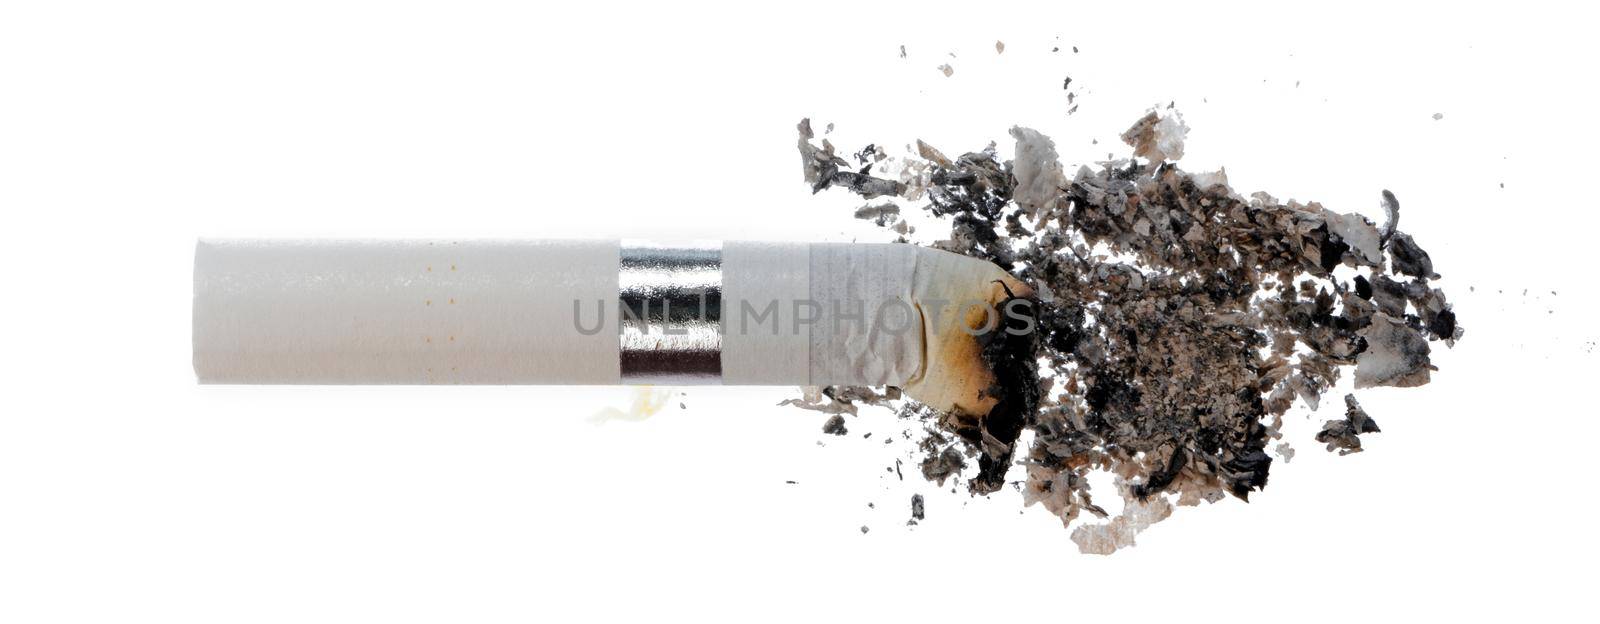 Extinguished cigarette butt isolated on white background close up